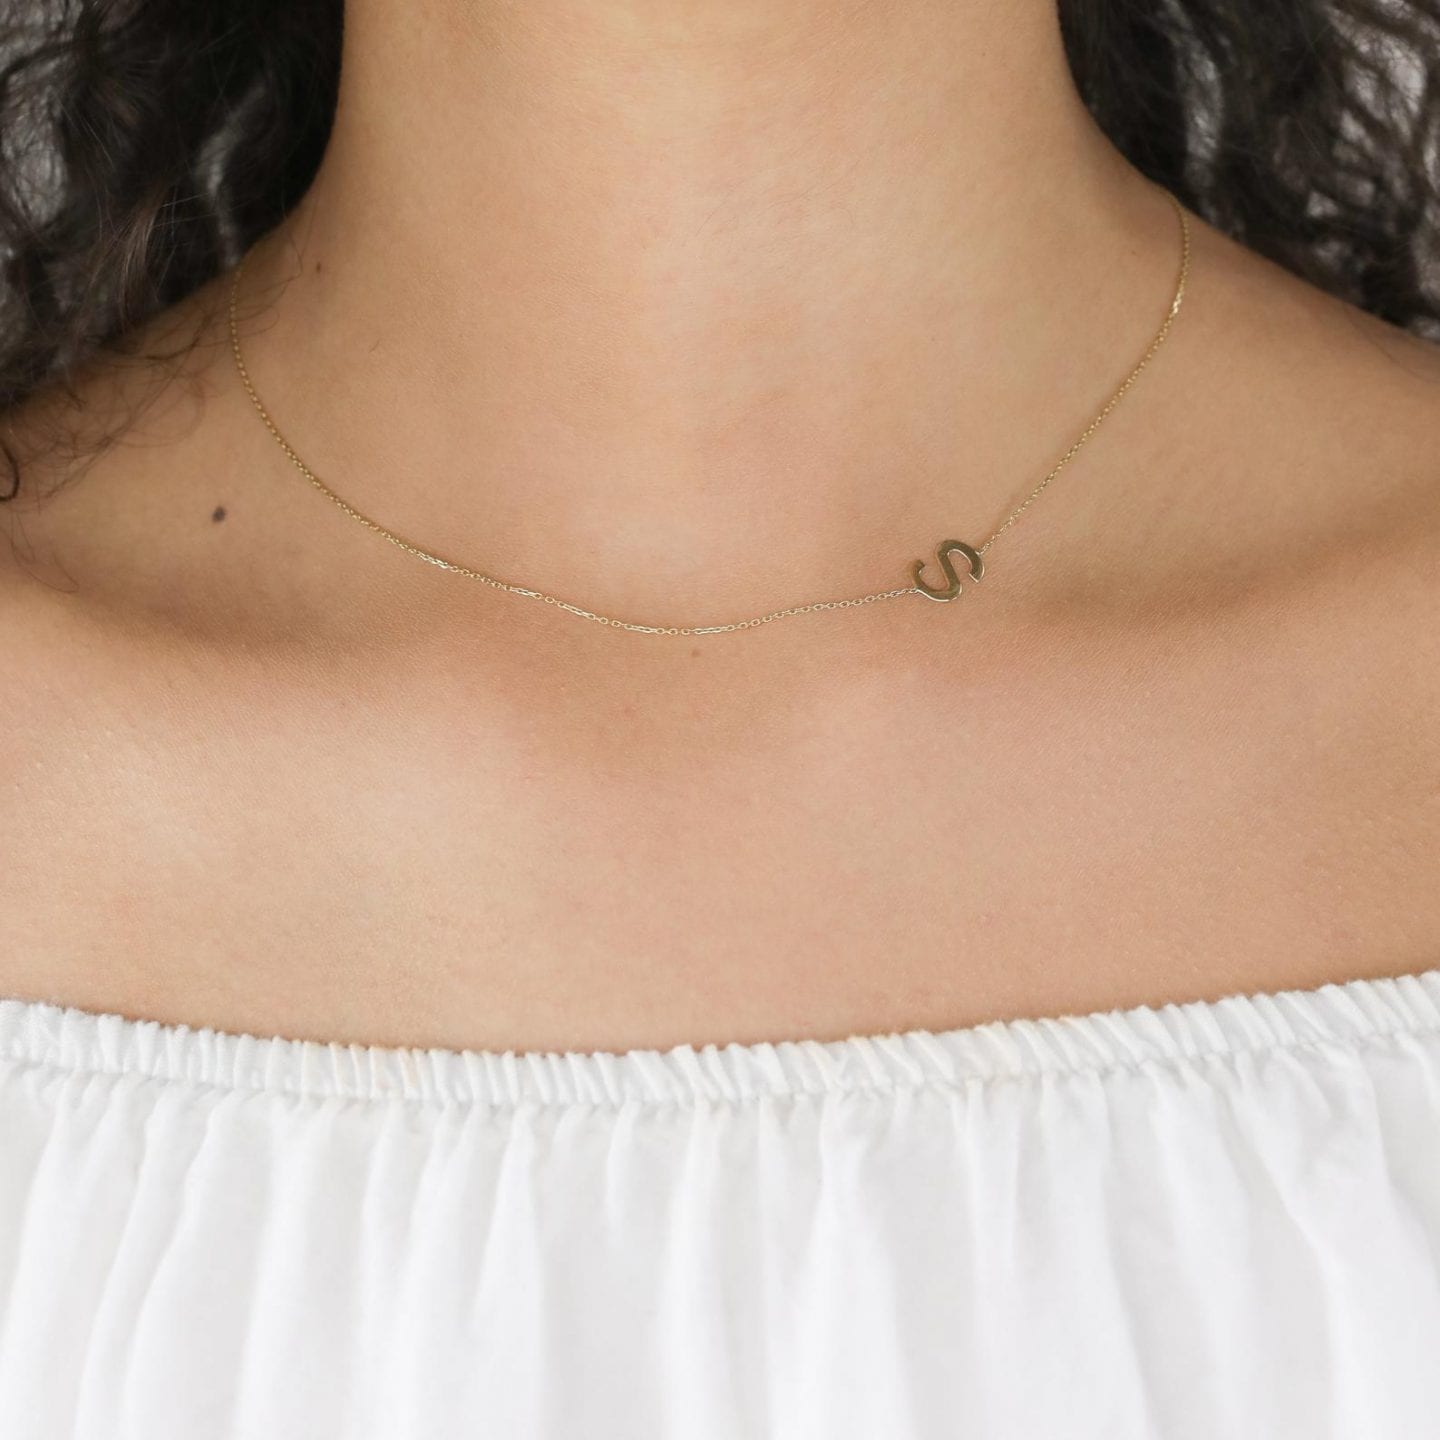 Initial Jewelry by popular San Francisco fashion blog, Just Add Glam: image of a 14k gold initial necklace.